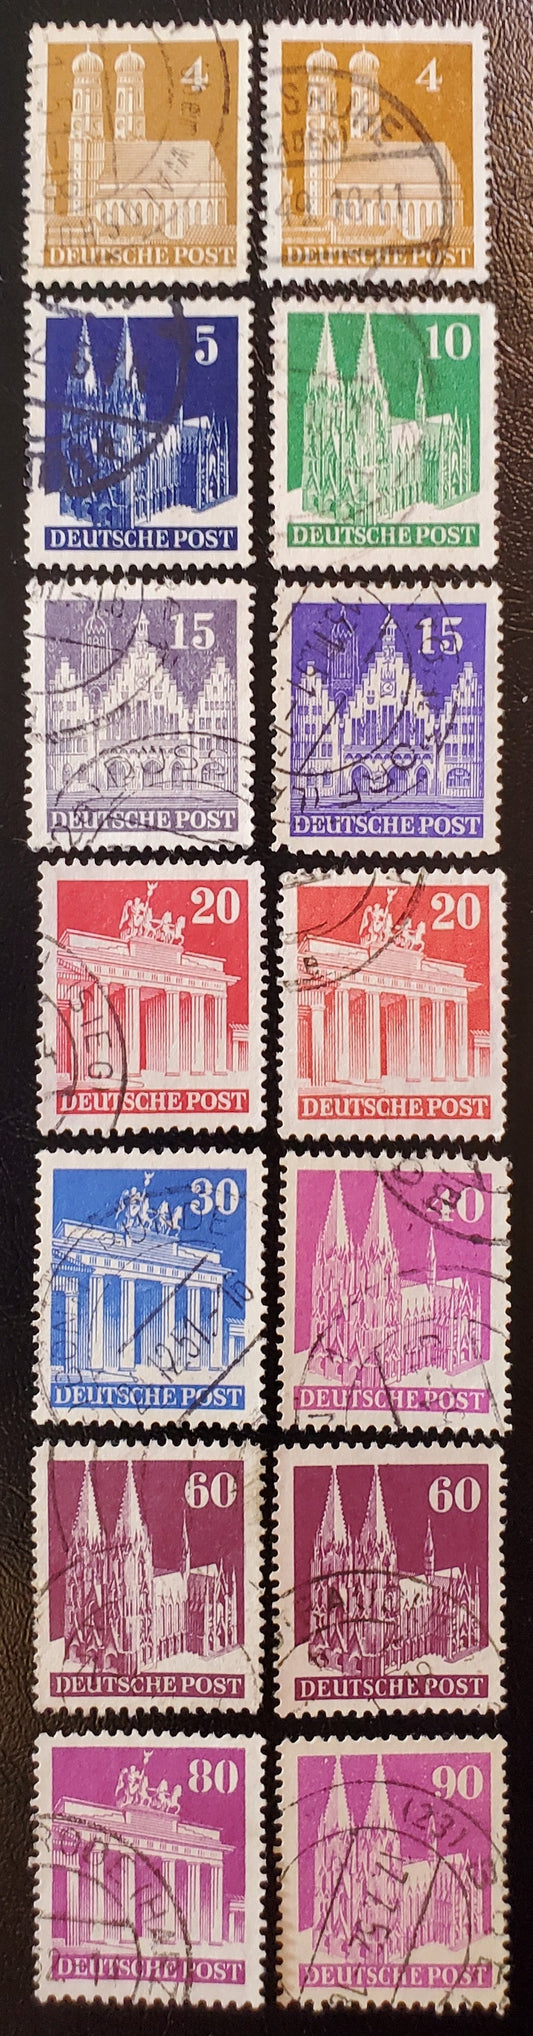 Lot 324 Germany - American and British Zone MI#74aWA/96IVWA (635a/657a) 1948-1951 Buildings Issue, 4pf Orange Brown - 90pf Rose Lilac, Comb Perf 14.25 x 14 and Line Perf. 14, Wmk W, Types 1 and 4, A VF Used Group, 2023 Michel Cat. €9.5, Net. Est. $8